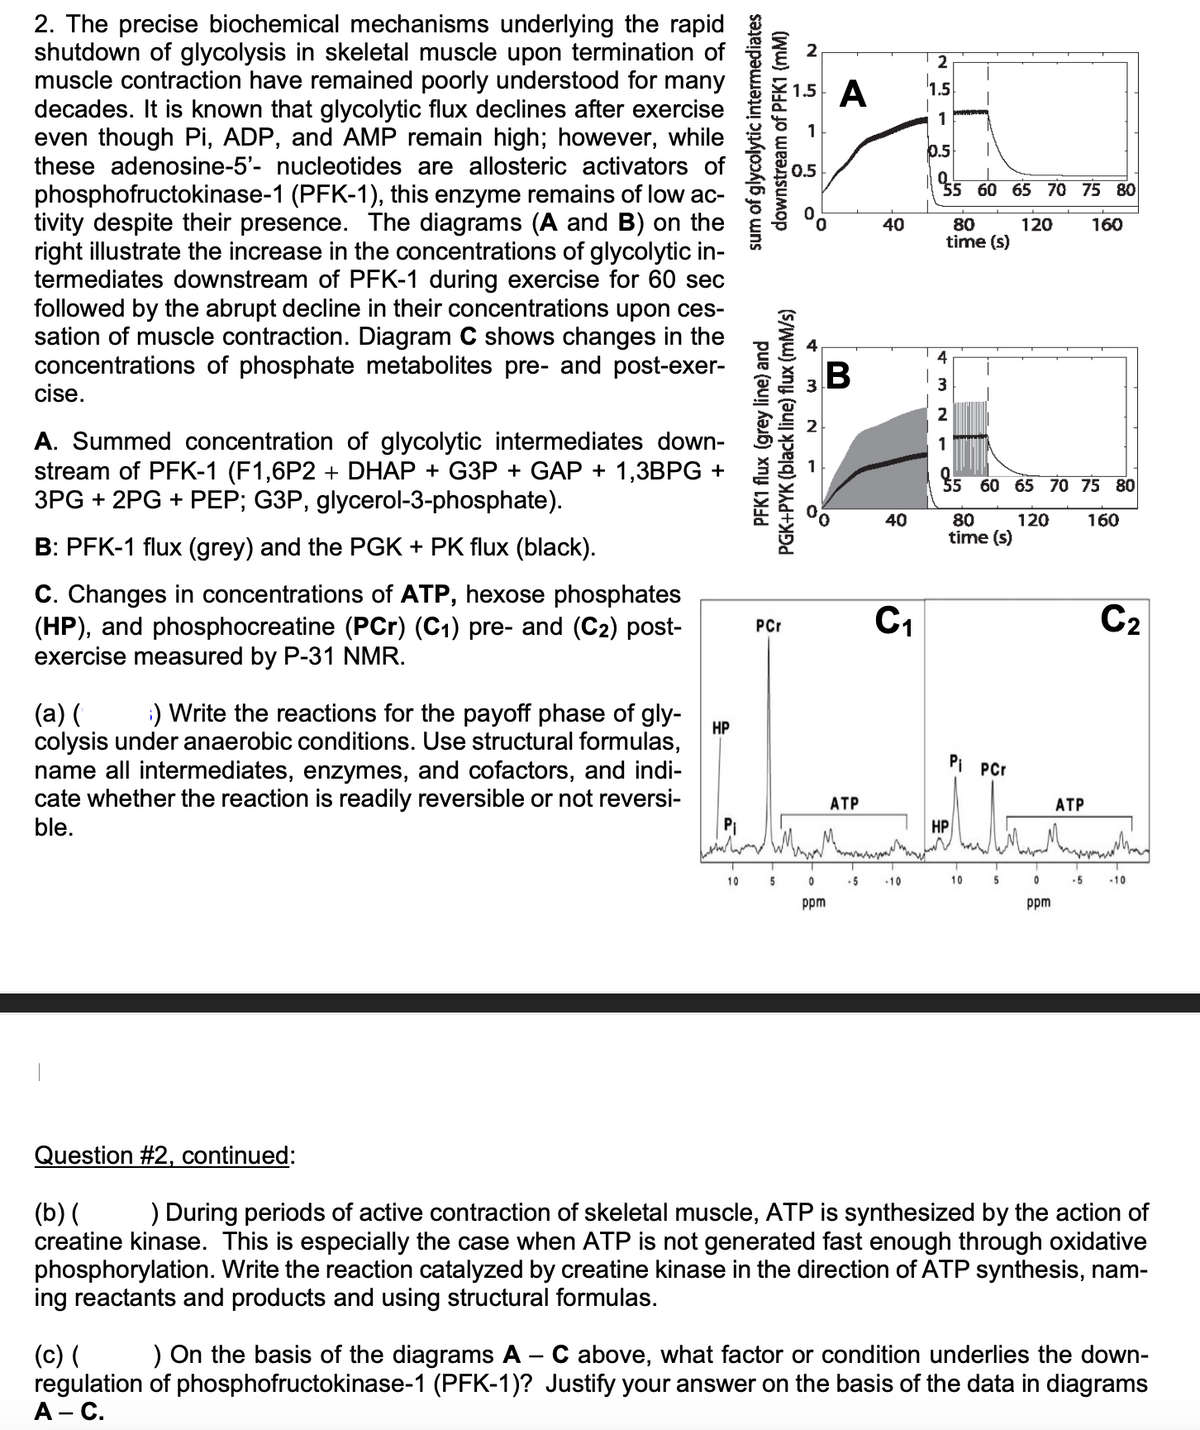 2. The precise biochemical mechanisms underlying the rapid
shutdown of glycolysis in skeletal muscle upon termination of
muscle contraction have remained poorly understood for many
decades. It is known that glycolytic flux declines after exercise
even though Pi, ADP, and AMP remain high; however, while
these adenosine-5'- nucleotides are allosteric activators of
phosphofructokinase-1 (PFK-1), this enzyme remains of low ac-
tivity despite their presence. The diagrams (A and B) on the
right illustrate the increase in the concentrations of glycolytic in-
termediates downstream of PFK-1 during exercise for 60 sec
followed by the abrupt decline in their concentrations upon ces-
sation of muscle contraction. Diagram C shows changes in the
concentrations of phosphate metabolites pre- and post-exer-
cise.
A. Summed concentration of glycolytic intermediates down-
stream of PFK-1 (F1,6P2 + DHAP + G3P + GAP + 1,3BPG +
3PG + 2PG + PEP; G3P, glycerol-3-phosphate).
B: PFK-1 flux (grey) and the PGK + PK flux (black).
C. Changes in concentrations of ATP, hexose phosphates
(HP), and phosphocreatine (PCr) (C1) pre- and (C2) post-
exercise measured by P-31 NMR.
(a) ( 6) Write the reactions for the payoff phase of gly-
colysis under anaerobic conditions. Use structural formulas,
name all intermediates, enzymes, and cofactors, and indi-
cate whether the reaction is readily reversible or not reversi-
ble.
HP
intermediates
2
1.5 A
1.5
1
1
0.5
0.5
PFK1 flux (grey line) and
PGK+PYK (black line) flux (mM/s)
sum of glycolytic
downstream of PFK1 (mM)
2
PCr
B
40
55 60 65 70 75 80
80
time (s)
120
160
3
2
40
95 60 65 70 75 80
55
80
time (s)
120
160
C₁1
ATP
HP
Pi PCr
ATP
C2
T
10
5
0
-5
-10
10
5
-5
-10
ppm
ppm
Question #2, continued:
(b) ( ) During periods of active contraction of skeletal muscle, ATP is synthesized by the action of
creatine kinase. This is especially the case when ATP is not generated fast enough through oxidative
phosphorylation. Write the reaction catalyzed by creatine kinase in the direction of ATP synthesis, nam-
ing reactants and products and using structural formulas.
(c) ( ) On the basis of the diagrams A - C above, what factor or condition underlies the down-
regulation of phosphofructokinase-1 (PFK-1)? Justify your answer on the basis of the data in diagrams
A - C.